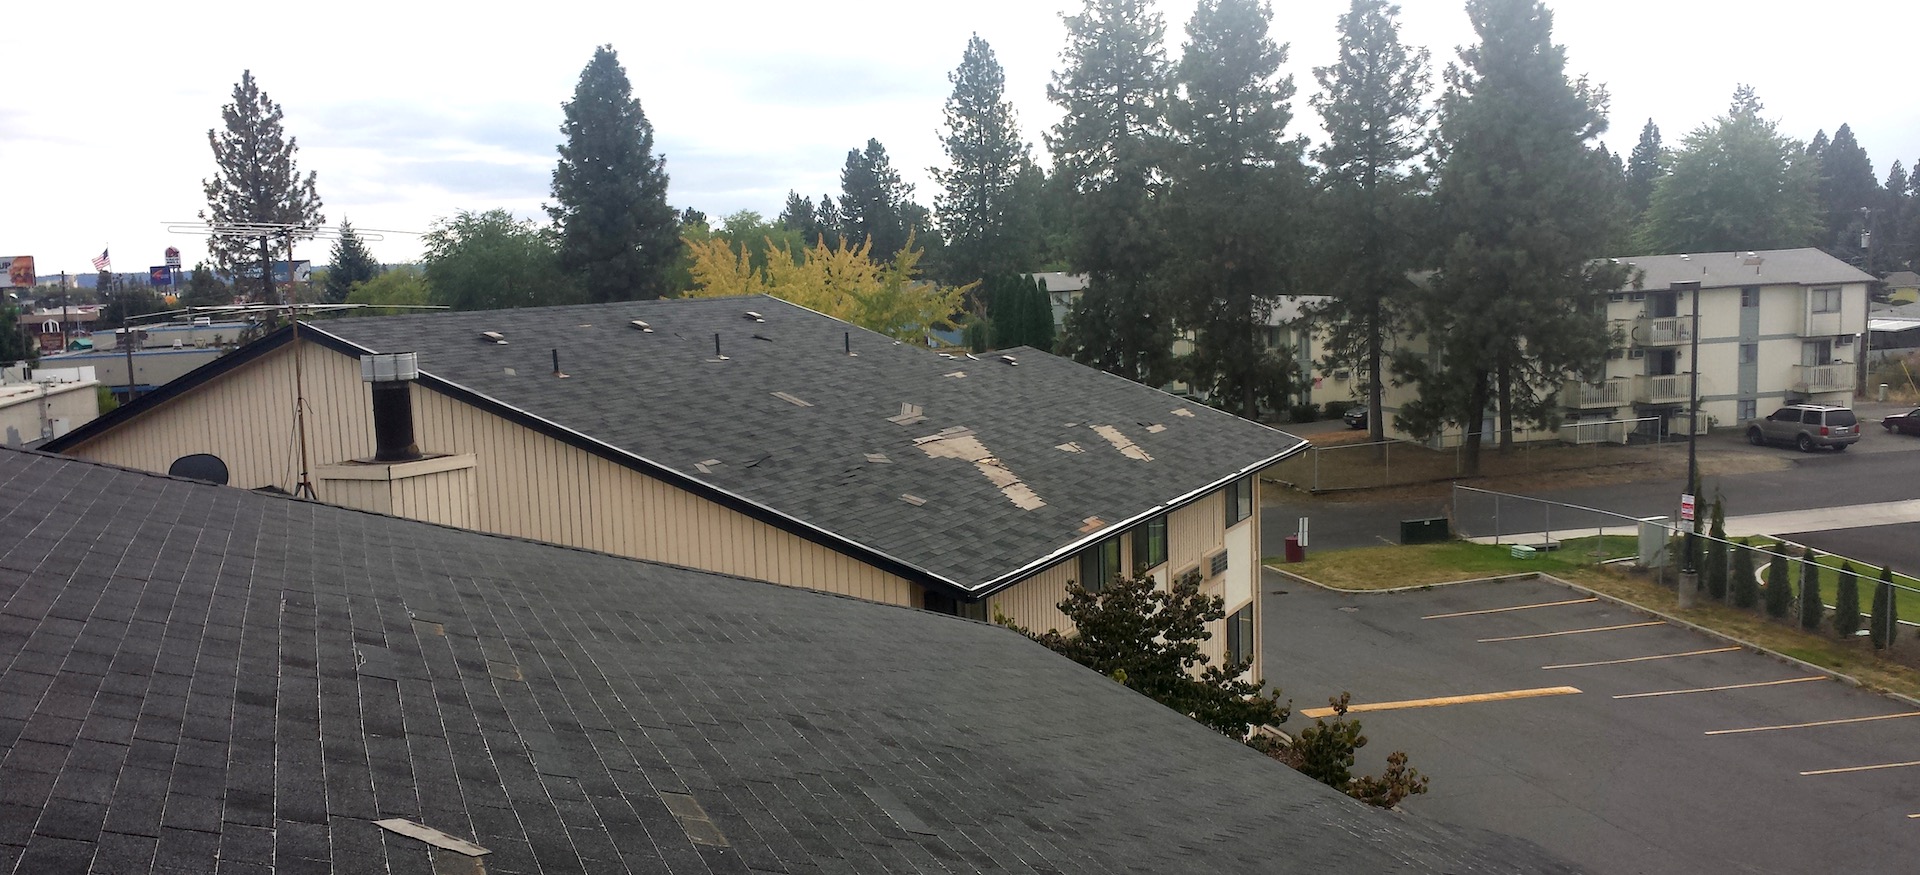 Windstorm Apartment Roof Damage - Roofing Shingles Unzipped And Blown About